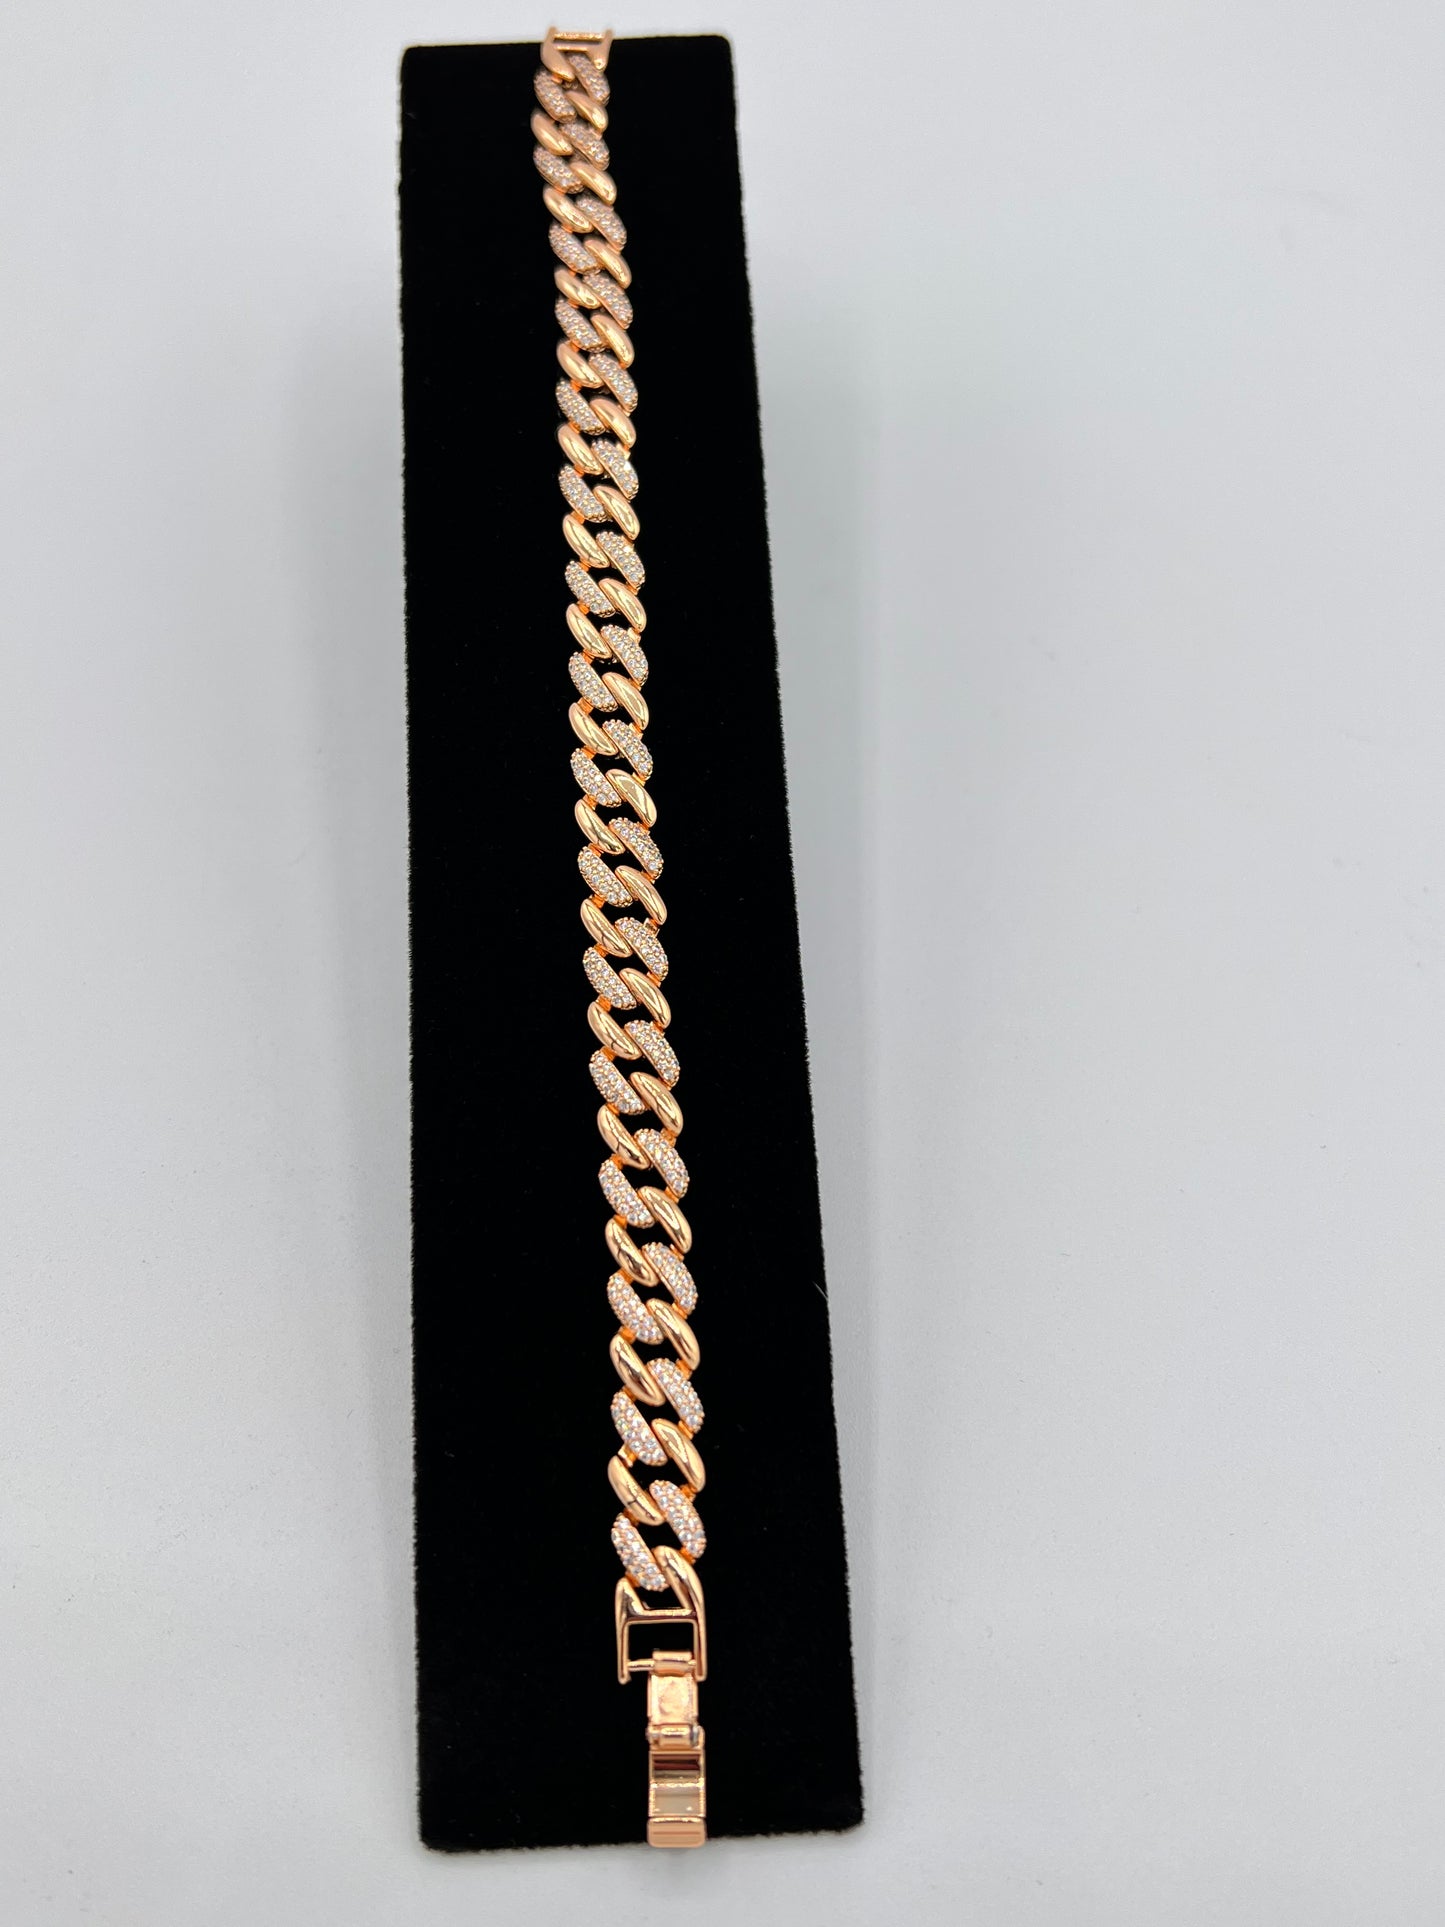 Bling Bling Cuiban Bracelet: Gold-Plated Statement Jewelry for Unmatched Glamour